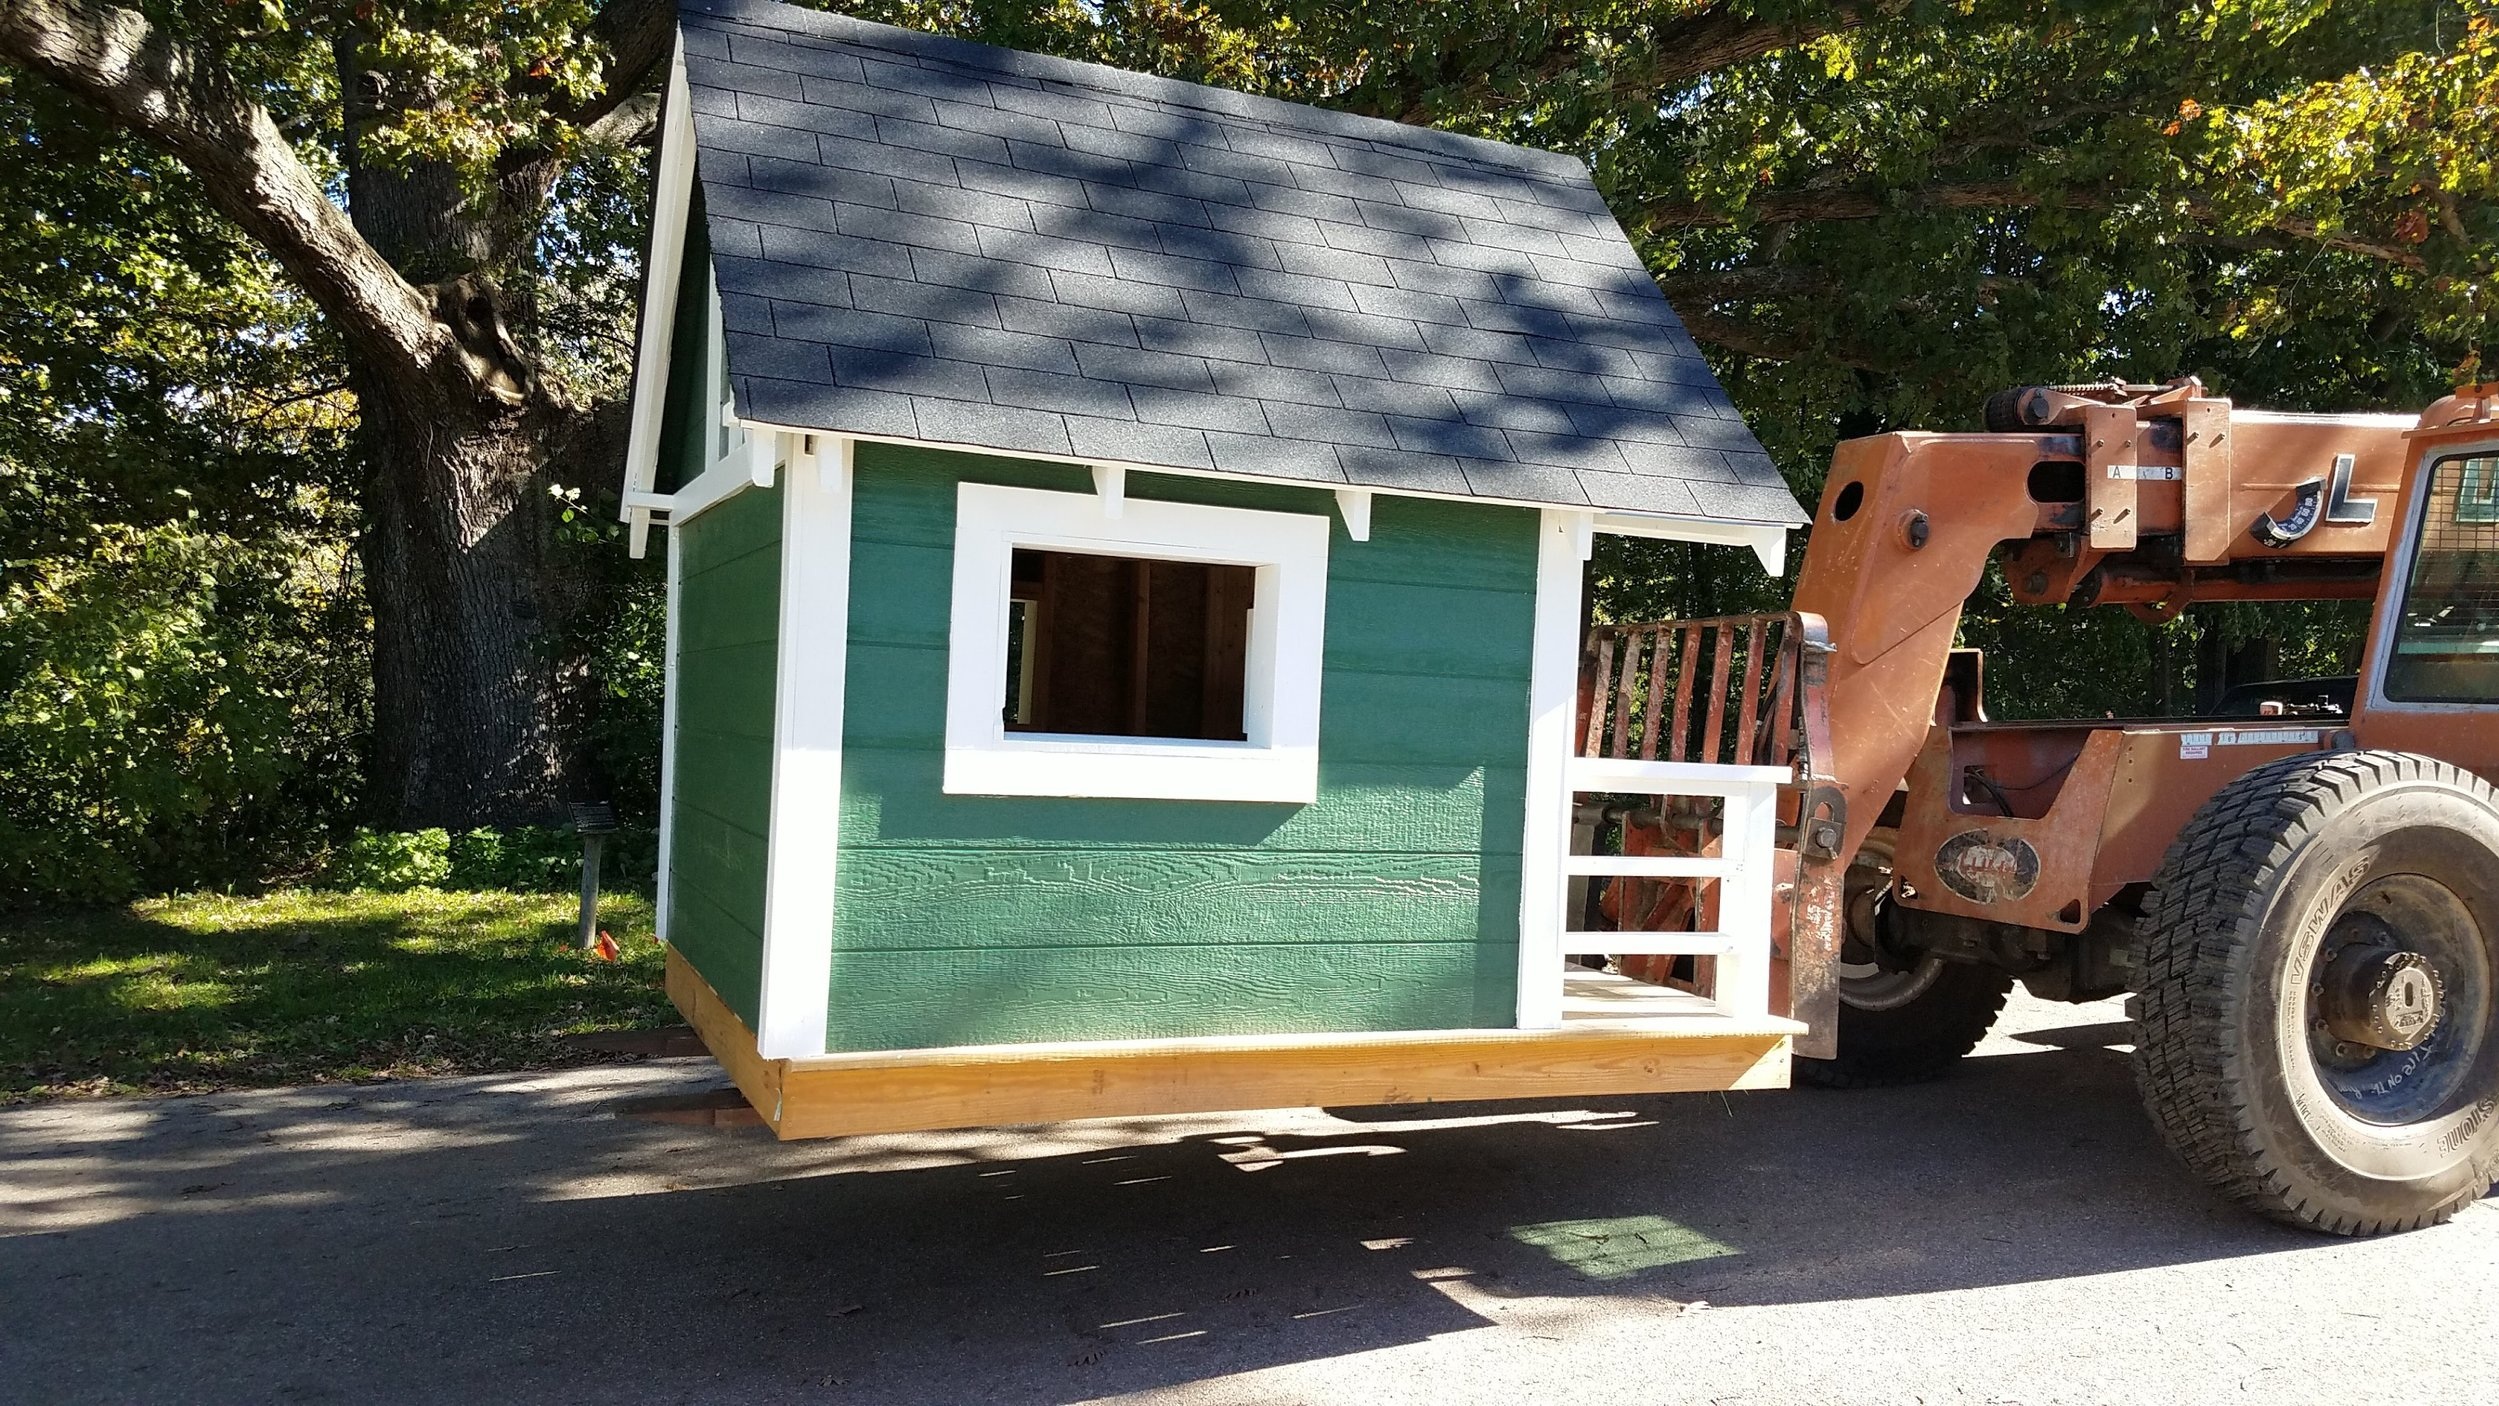 Built by the kids in 2019 to help raise money for building a tiny house for a stranger in need.